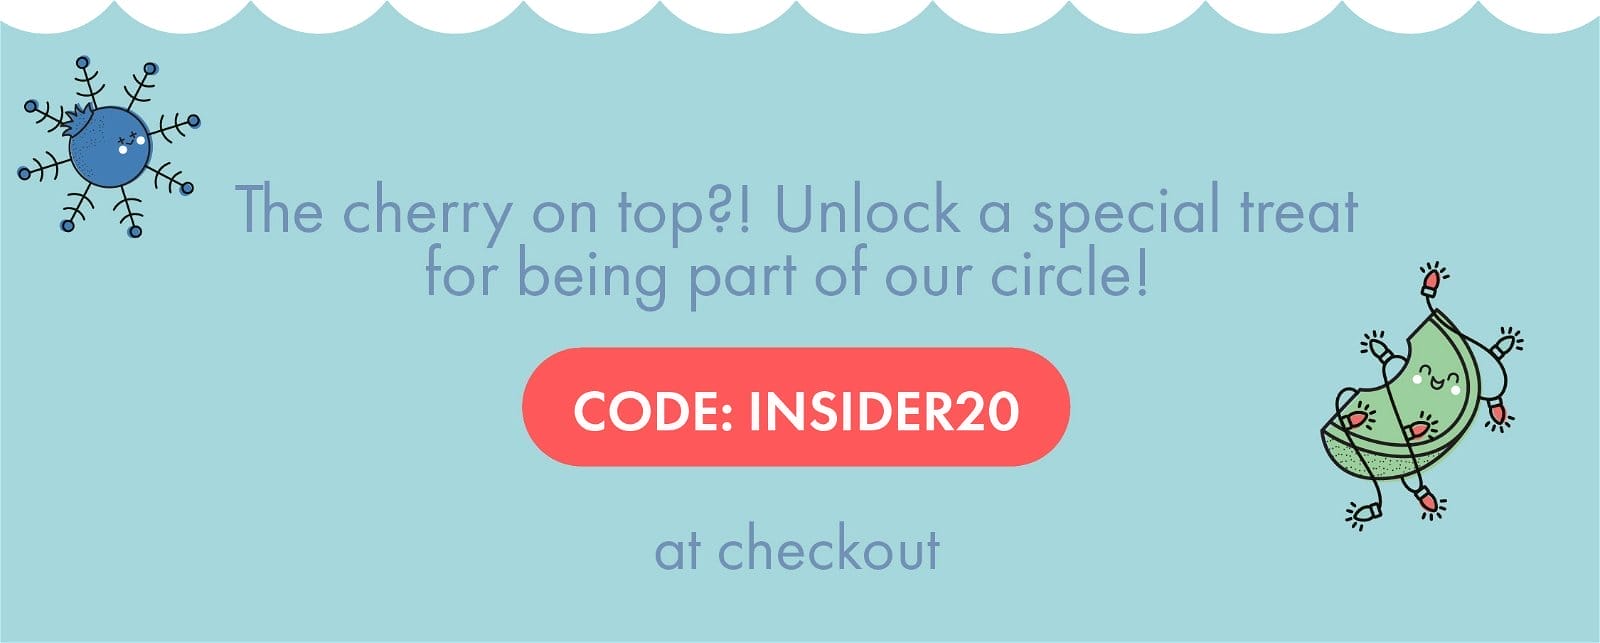 The cherry on top?! Unlock a special treat for being part of our circle! CODE: INSIDER20 at checkout